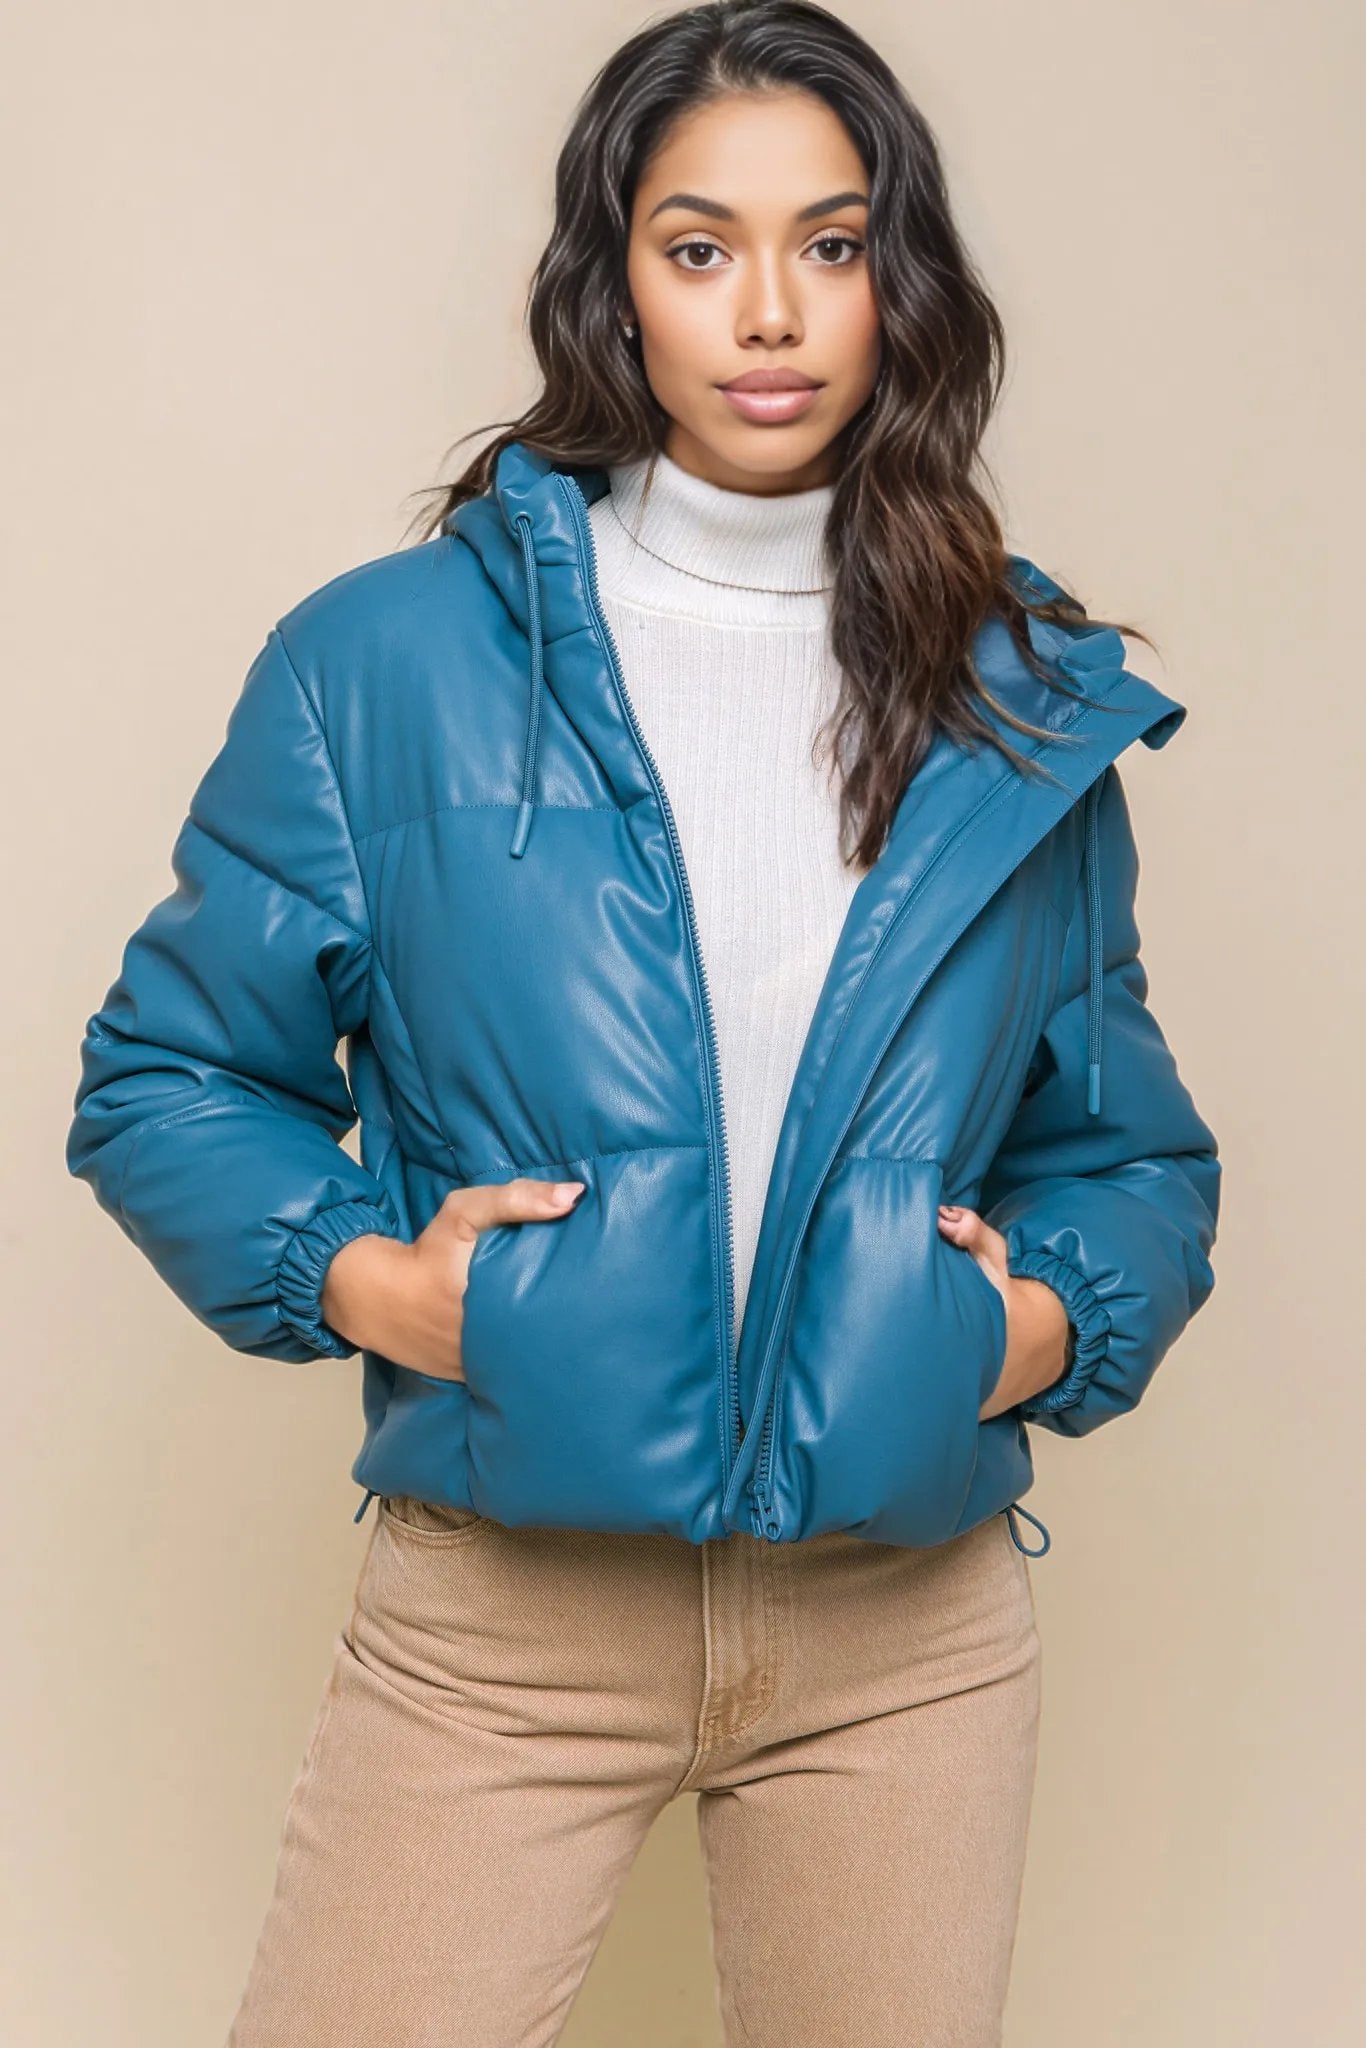 Mary Jane Faux Leather Zipper Hooded Puffer Jacket